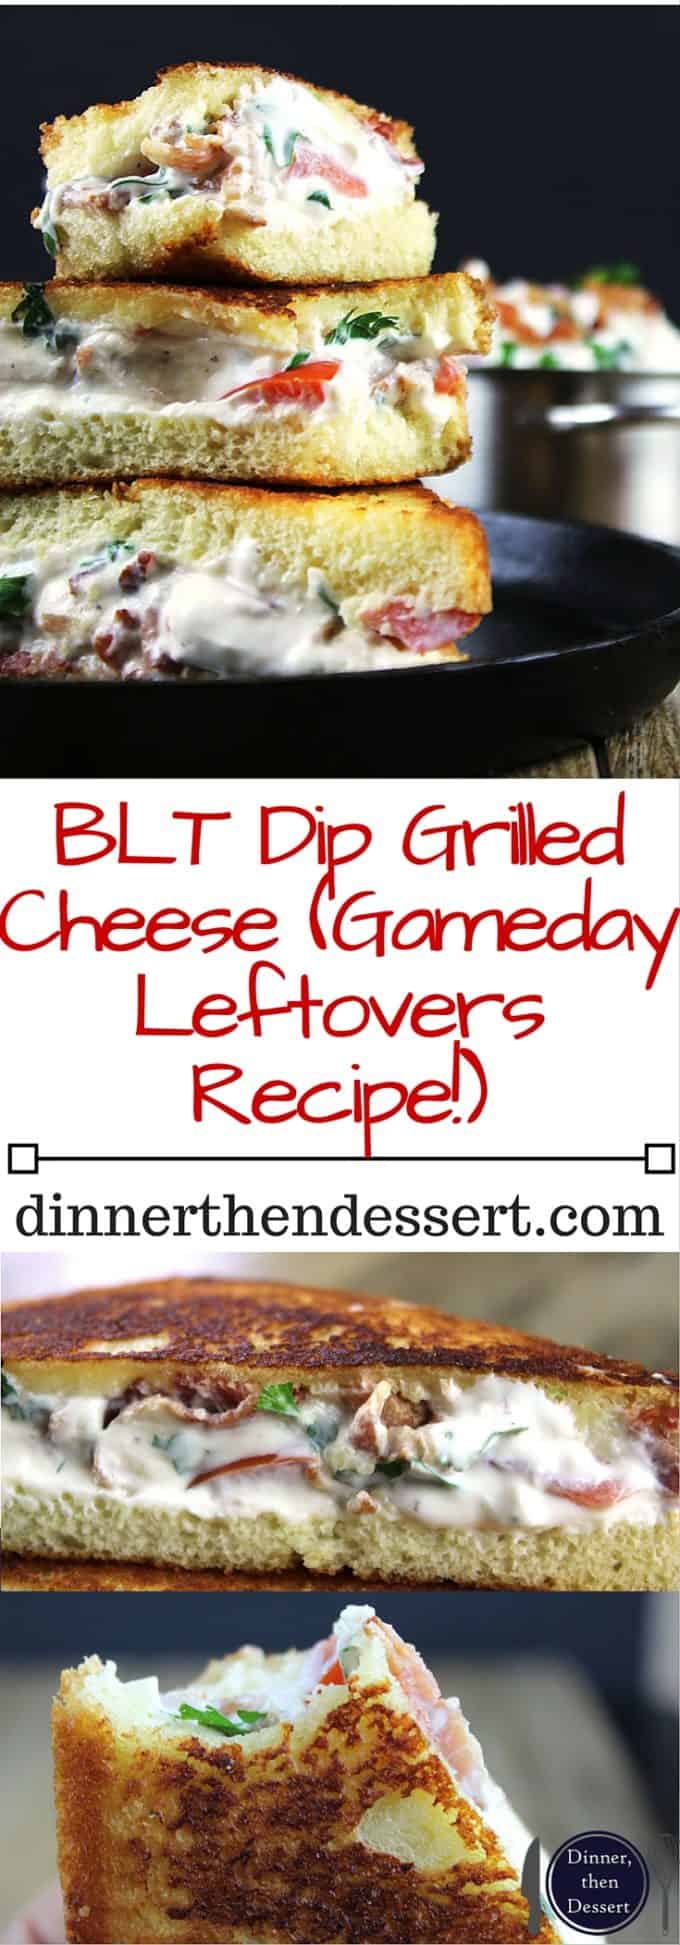 Creamy, tangy and full of bacon, this BLT Dip Grilled Cheese Sandwich will be your new favorite! Made with a crispy buttery buttermilk bread exterior and a melted bacon filling, this is an easy Round Two recipe for BLT Dip!